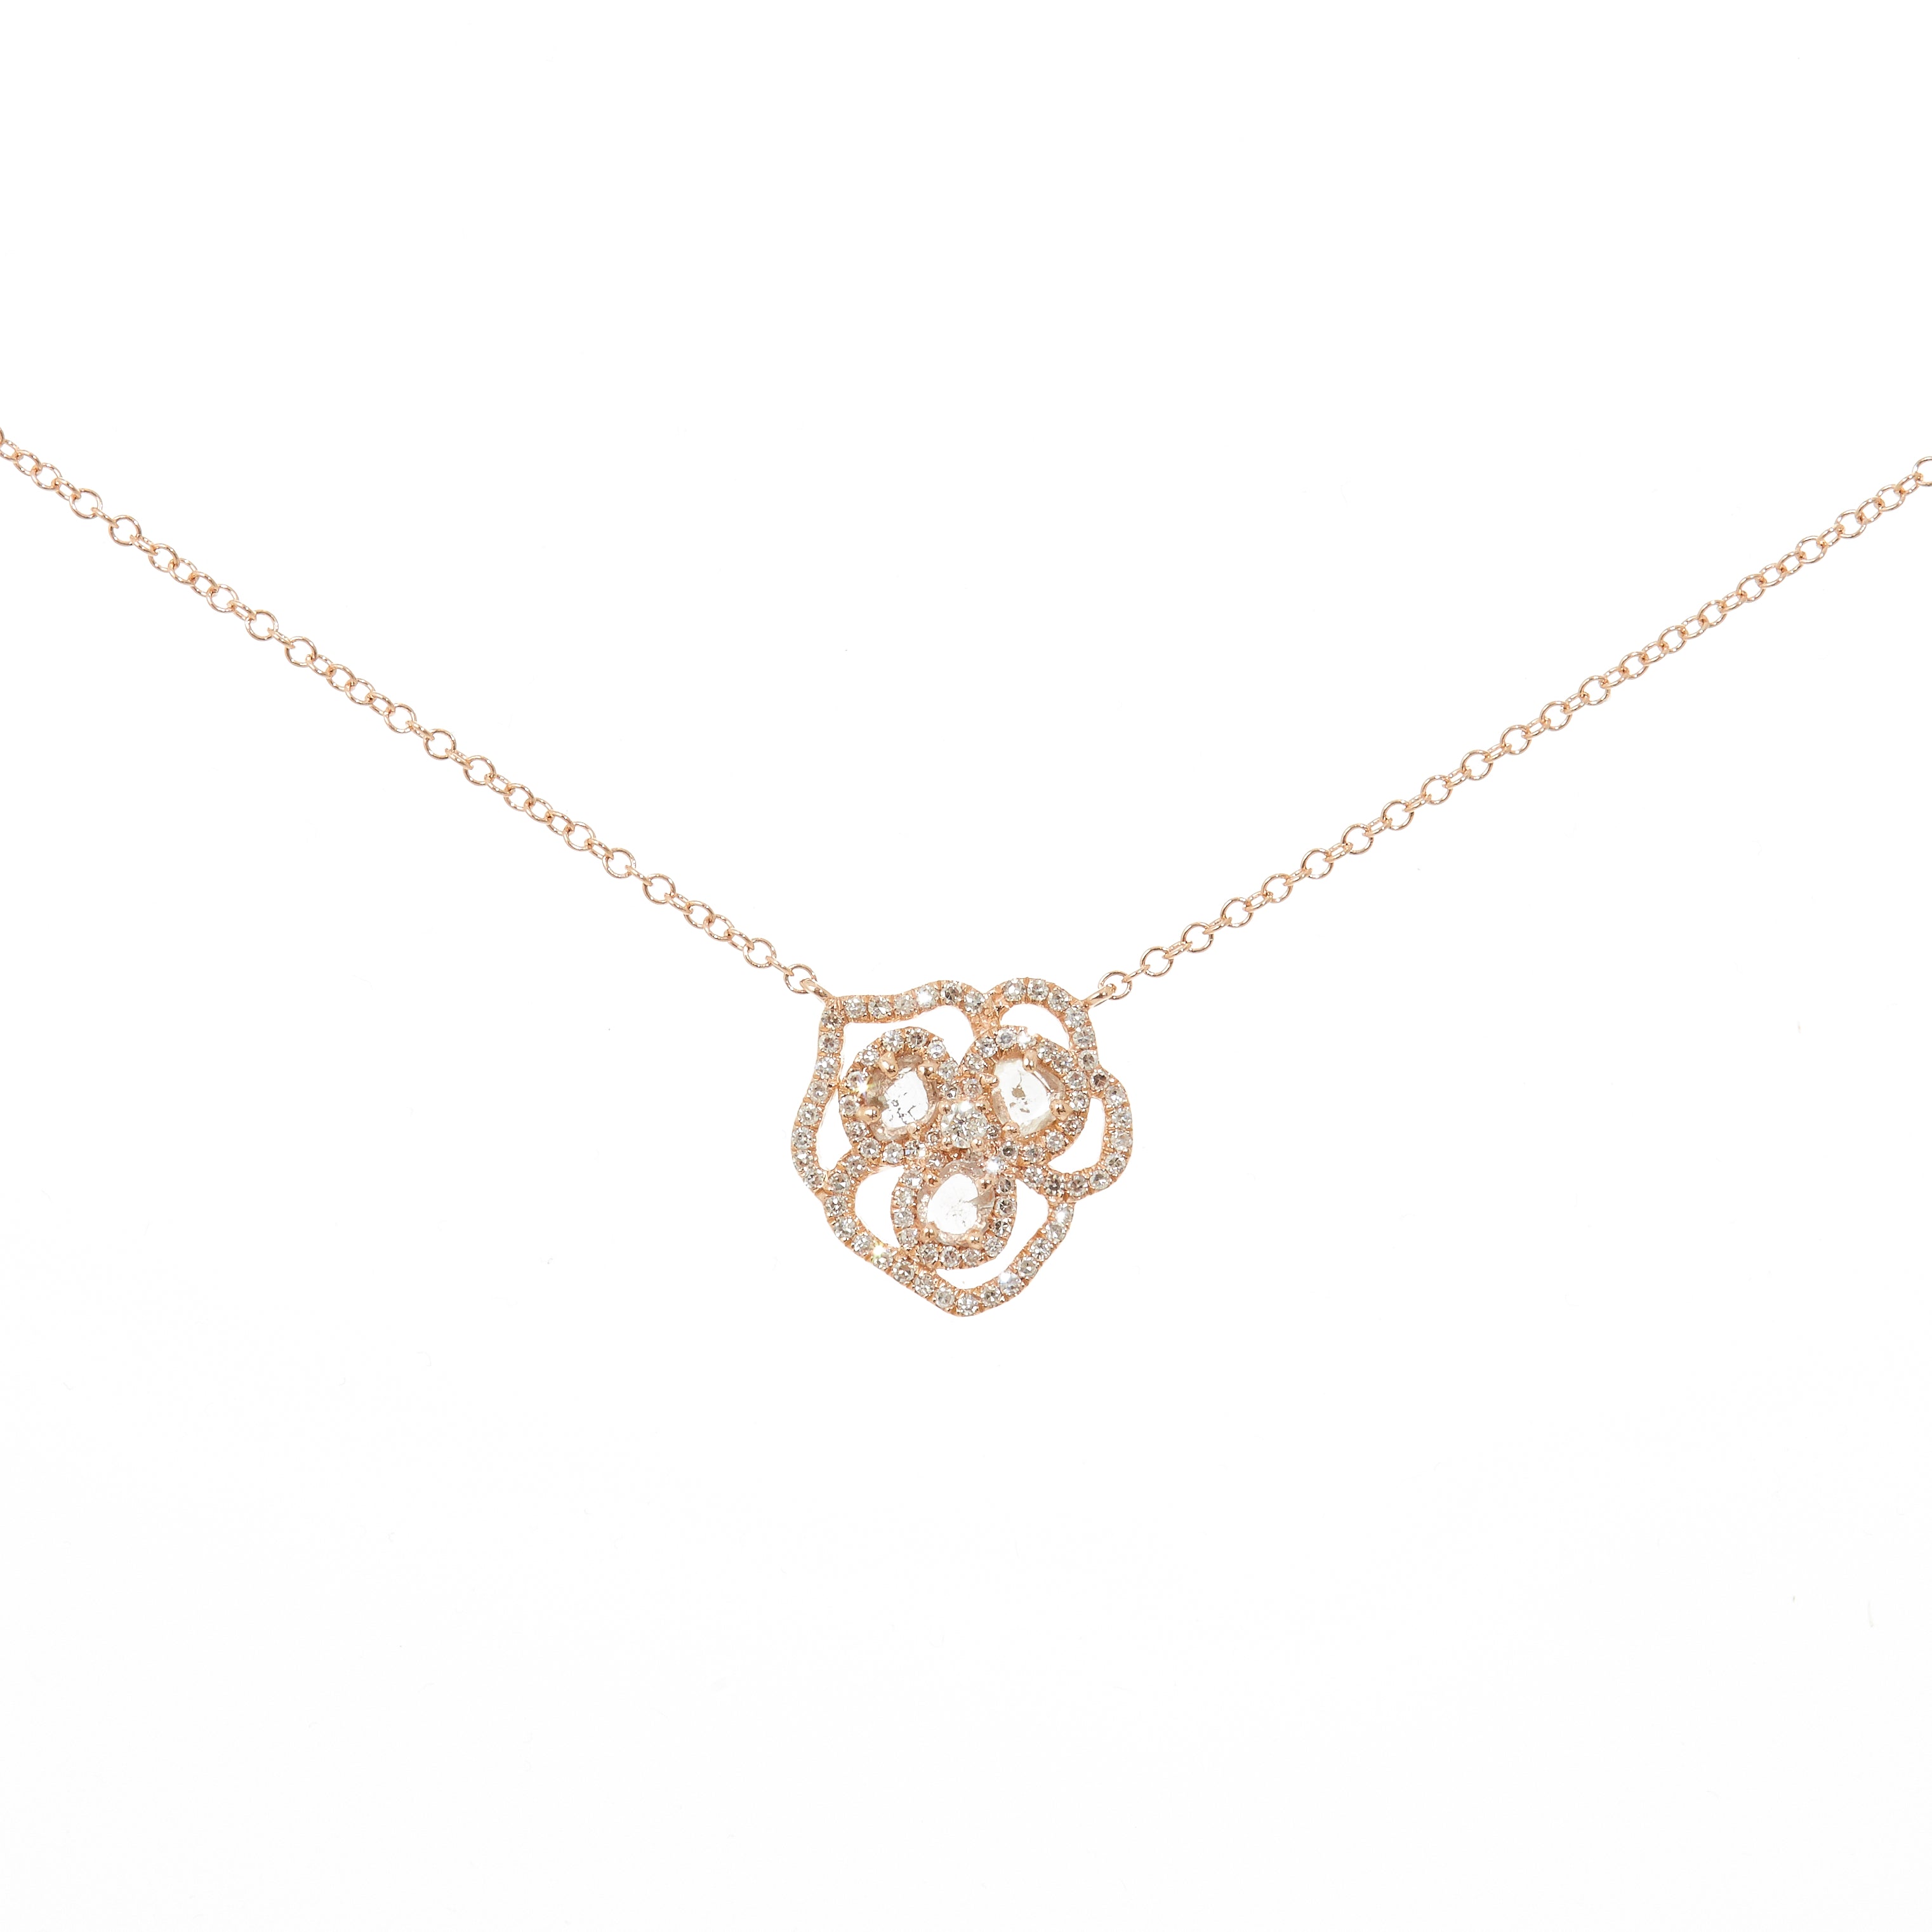 Chanel necklace, Camellia extract, rose gold, diamond.